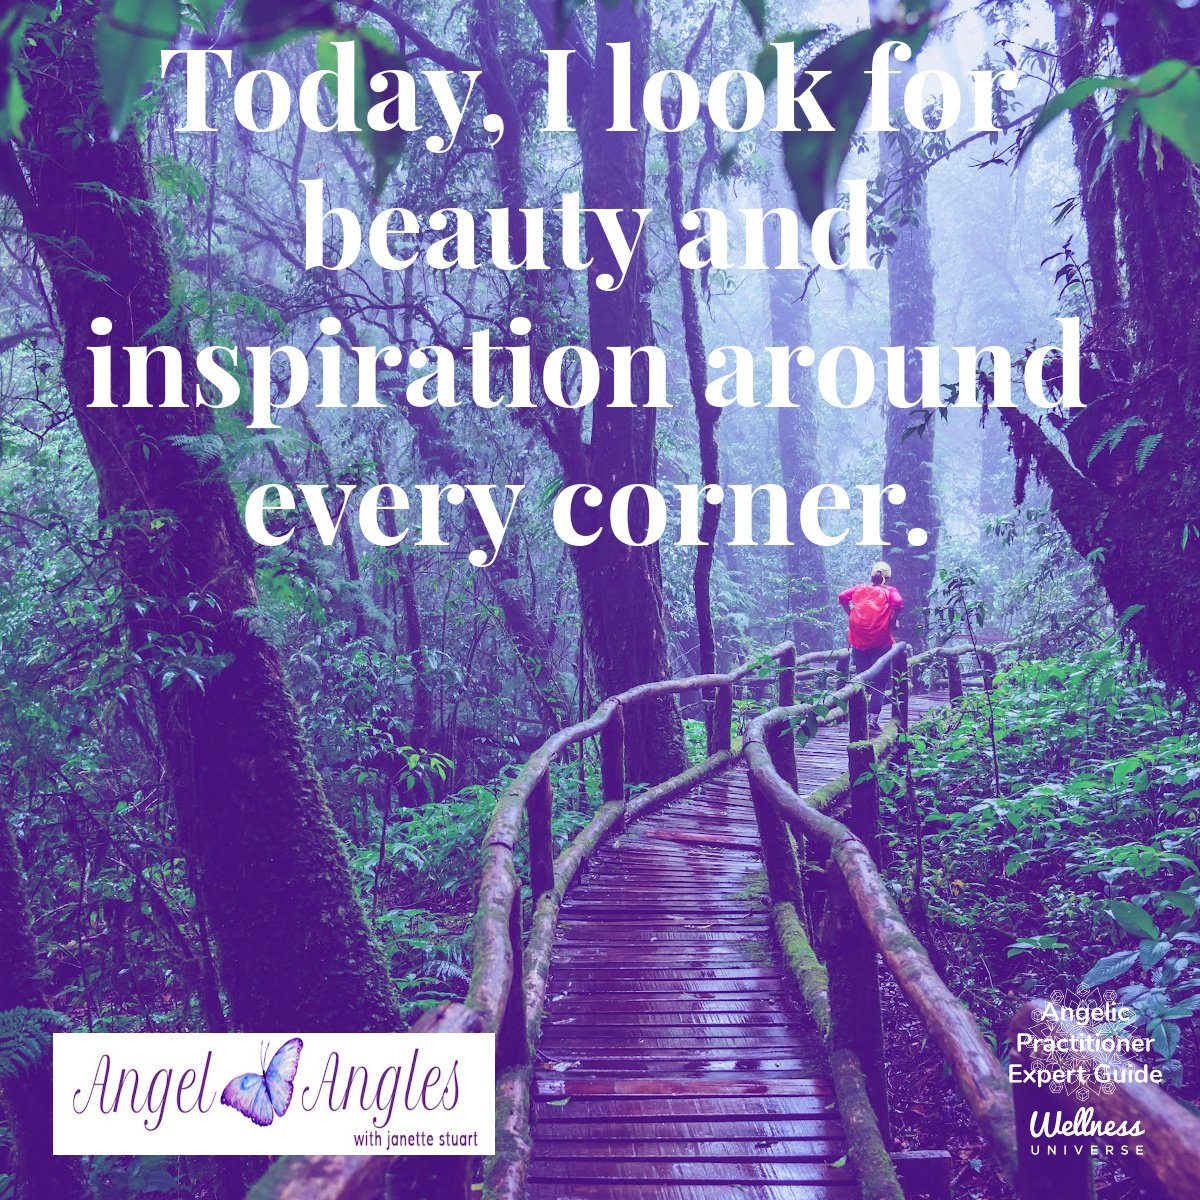 Hello and welcome to your Angel Affirmation for Thurs. May 2, 2024. 

Today, I look for beauty and inspiration around every corner. Yes! Amen, and so it is. 

Blessings of love, joy, and peace.
Love,
Janette 
.
.
#WUVIP #WUWorldChanger #AngelAffirmat